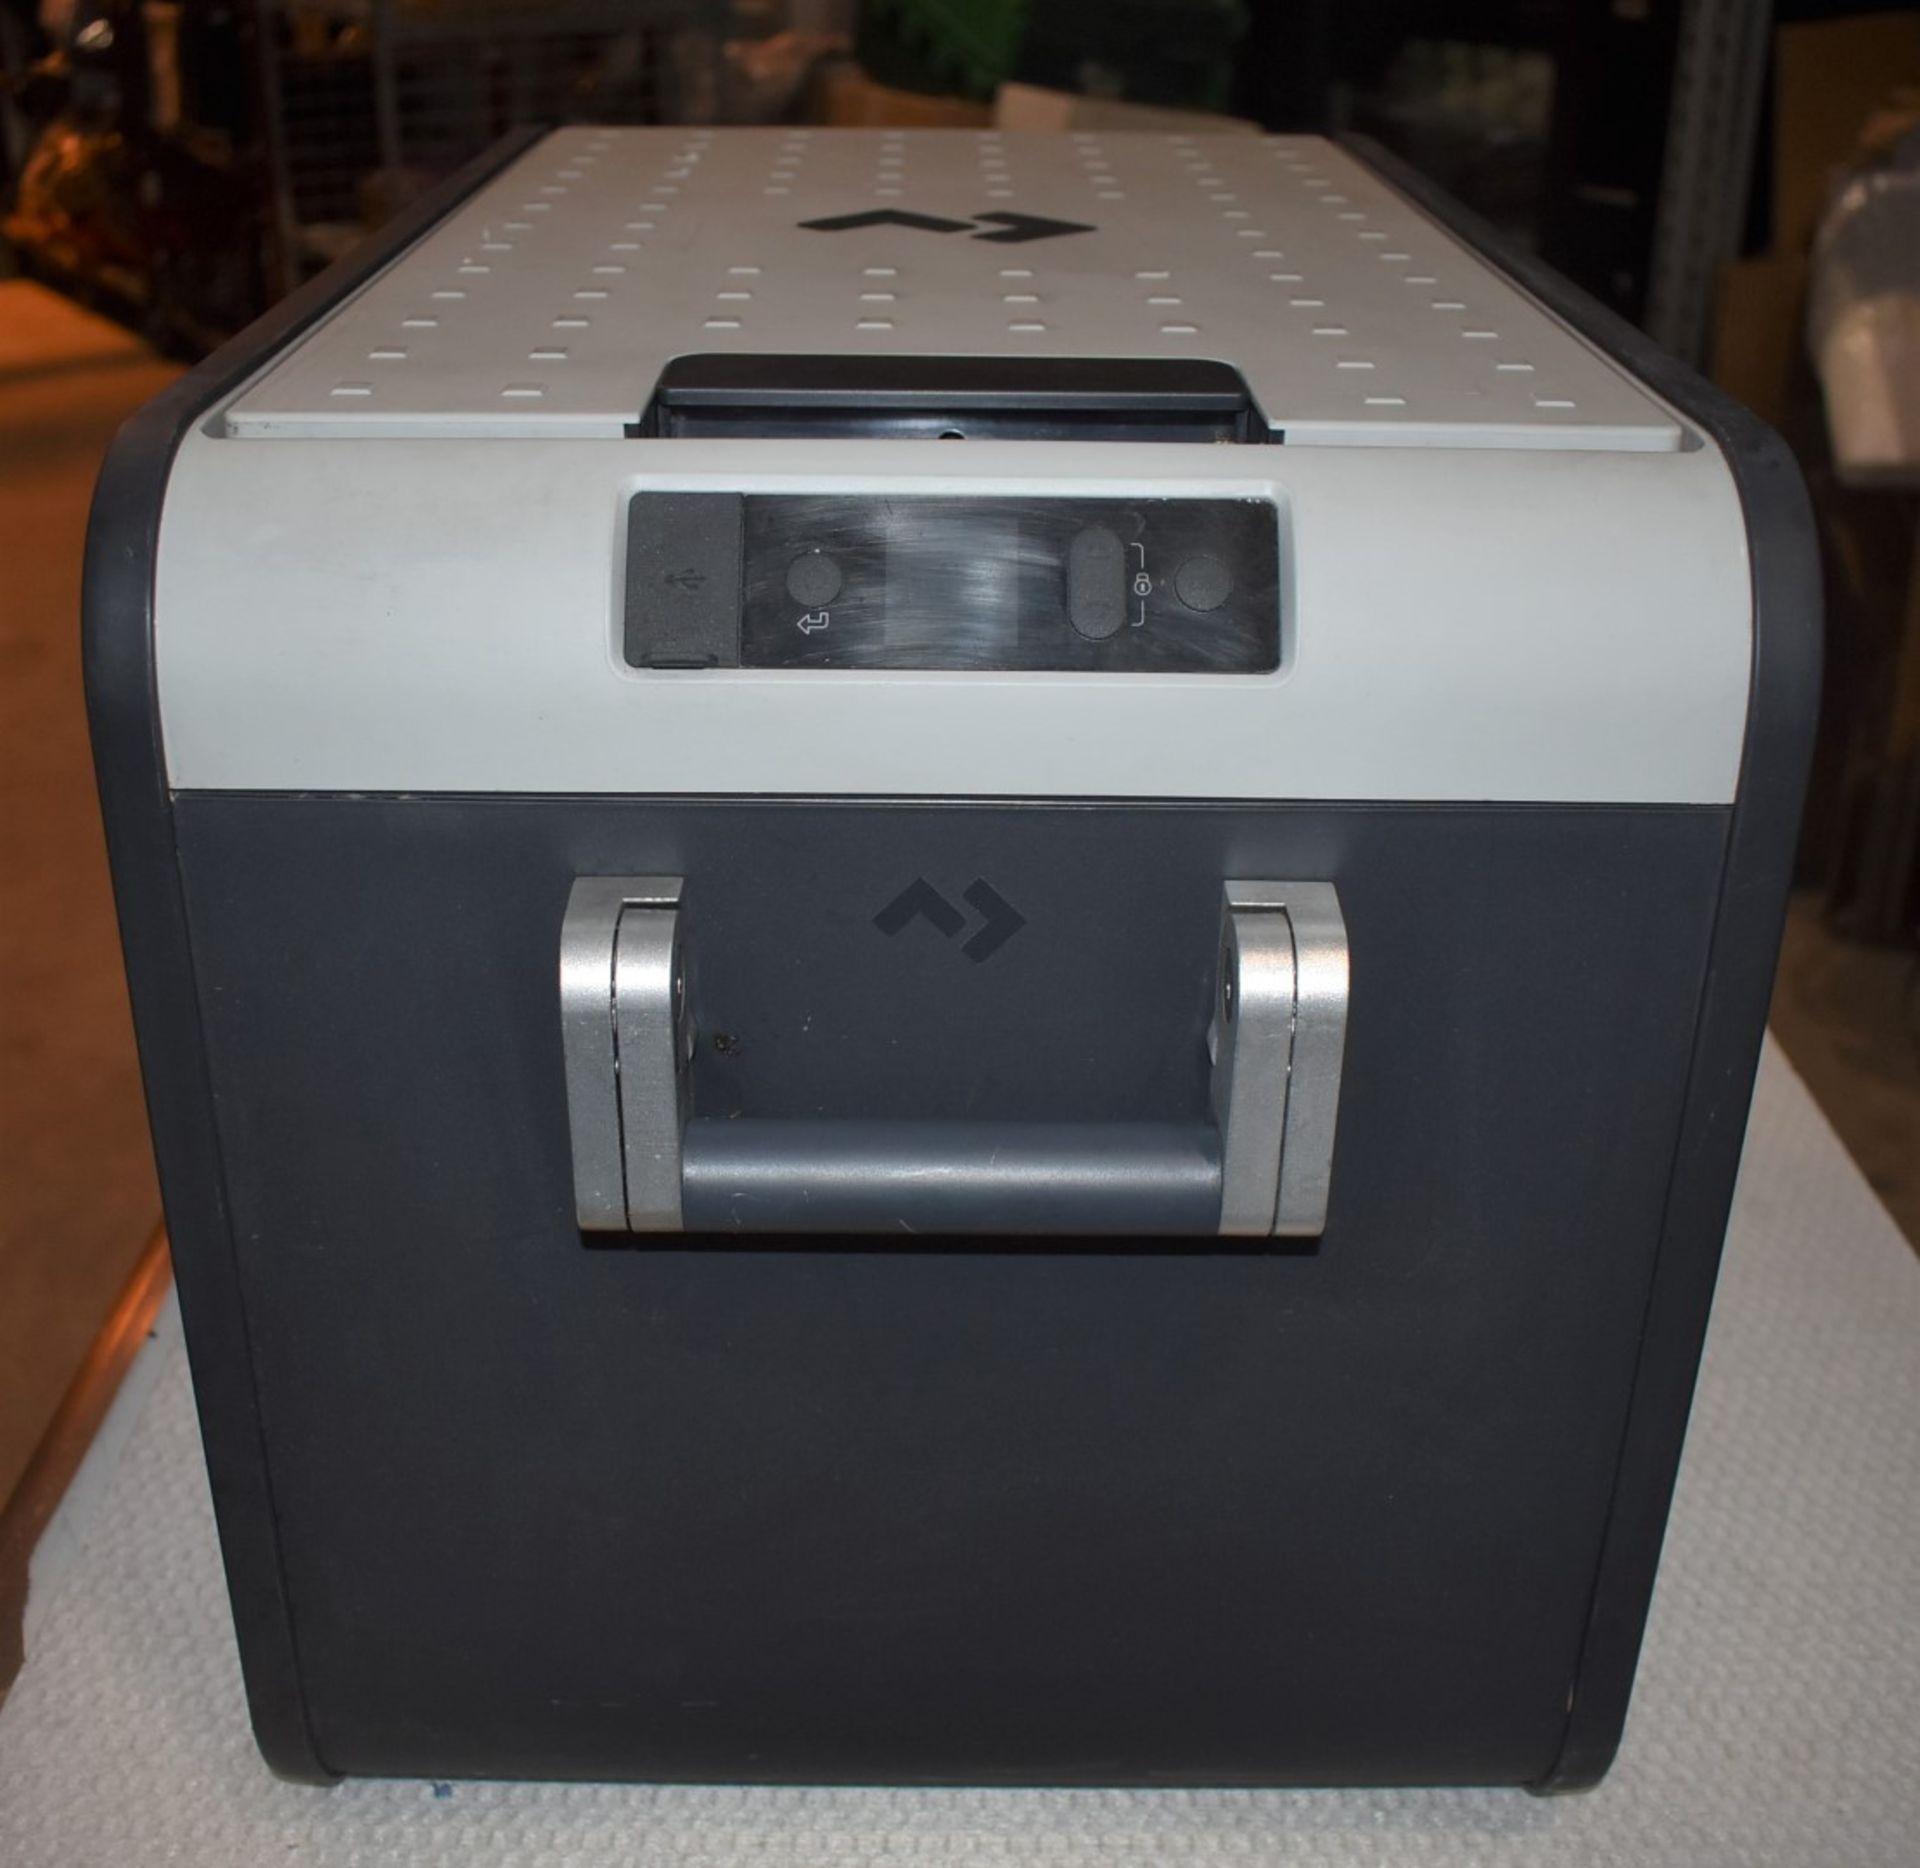 1 x Dometic CFX3 35 Portable 32l Compressor Cooler and Freezer - Perfect For Cooling The Christmas - Image 9 of 9